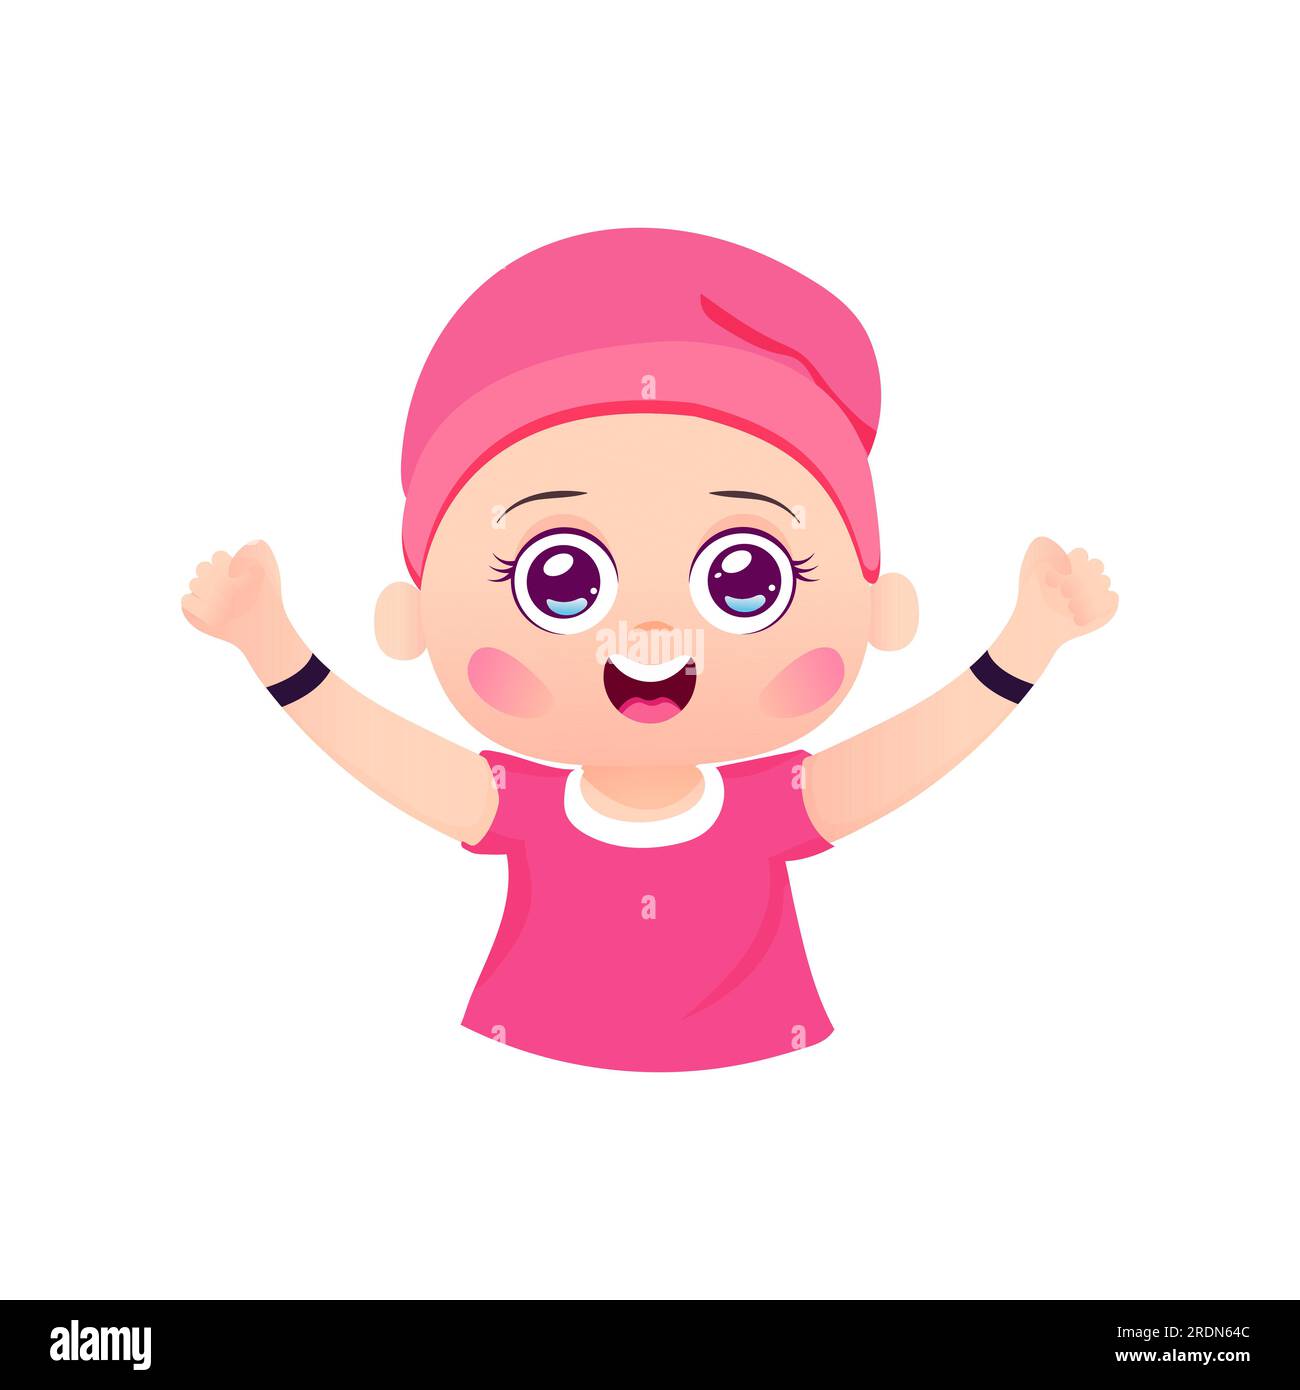 vector illustration of a child in a hat bald, possibly sick cured of cancer Stock Vector